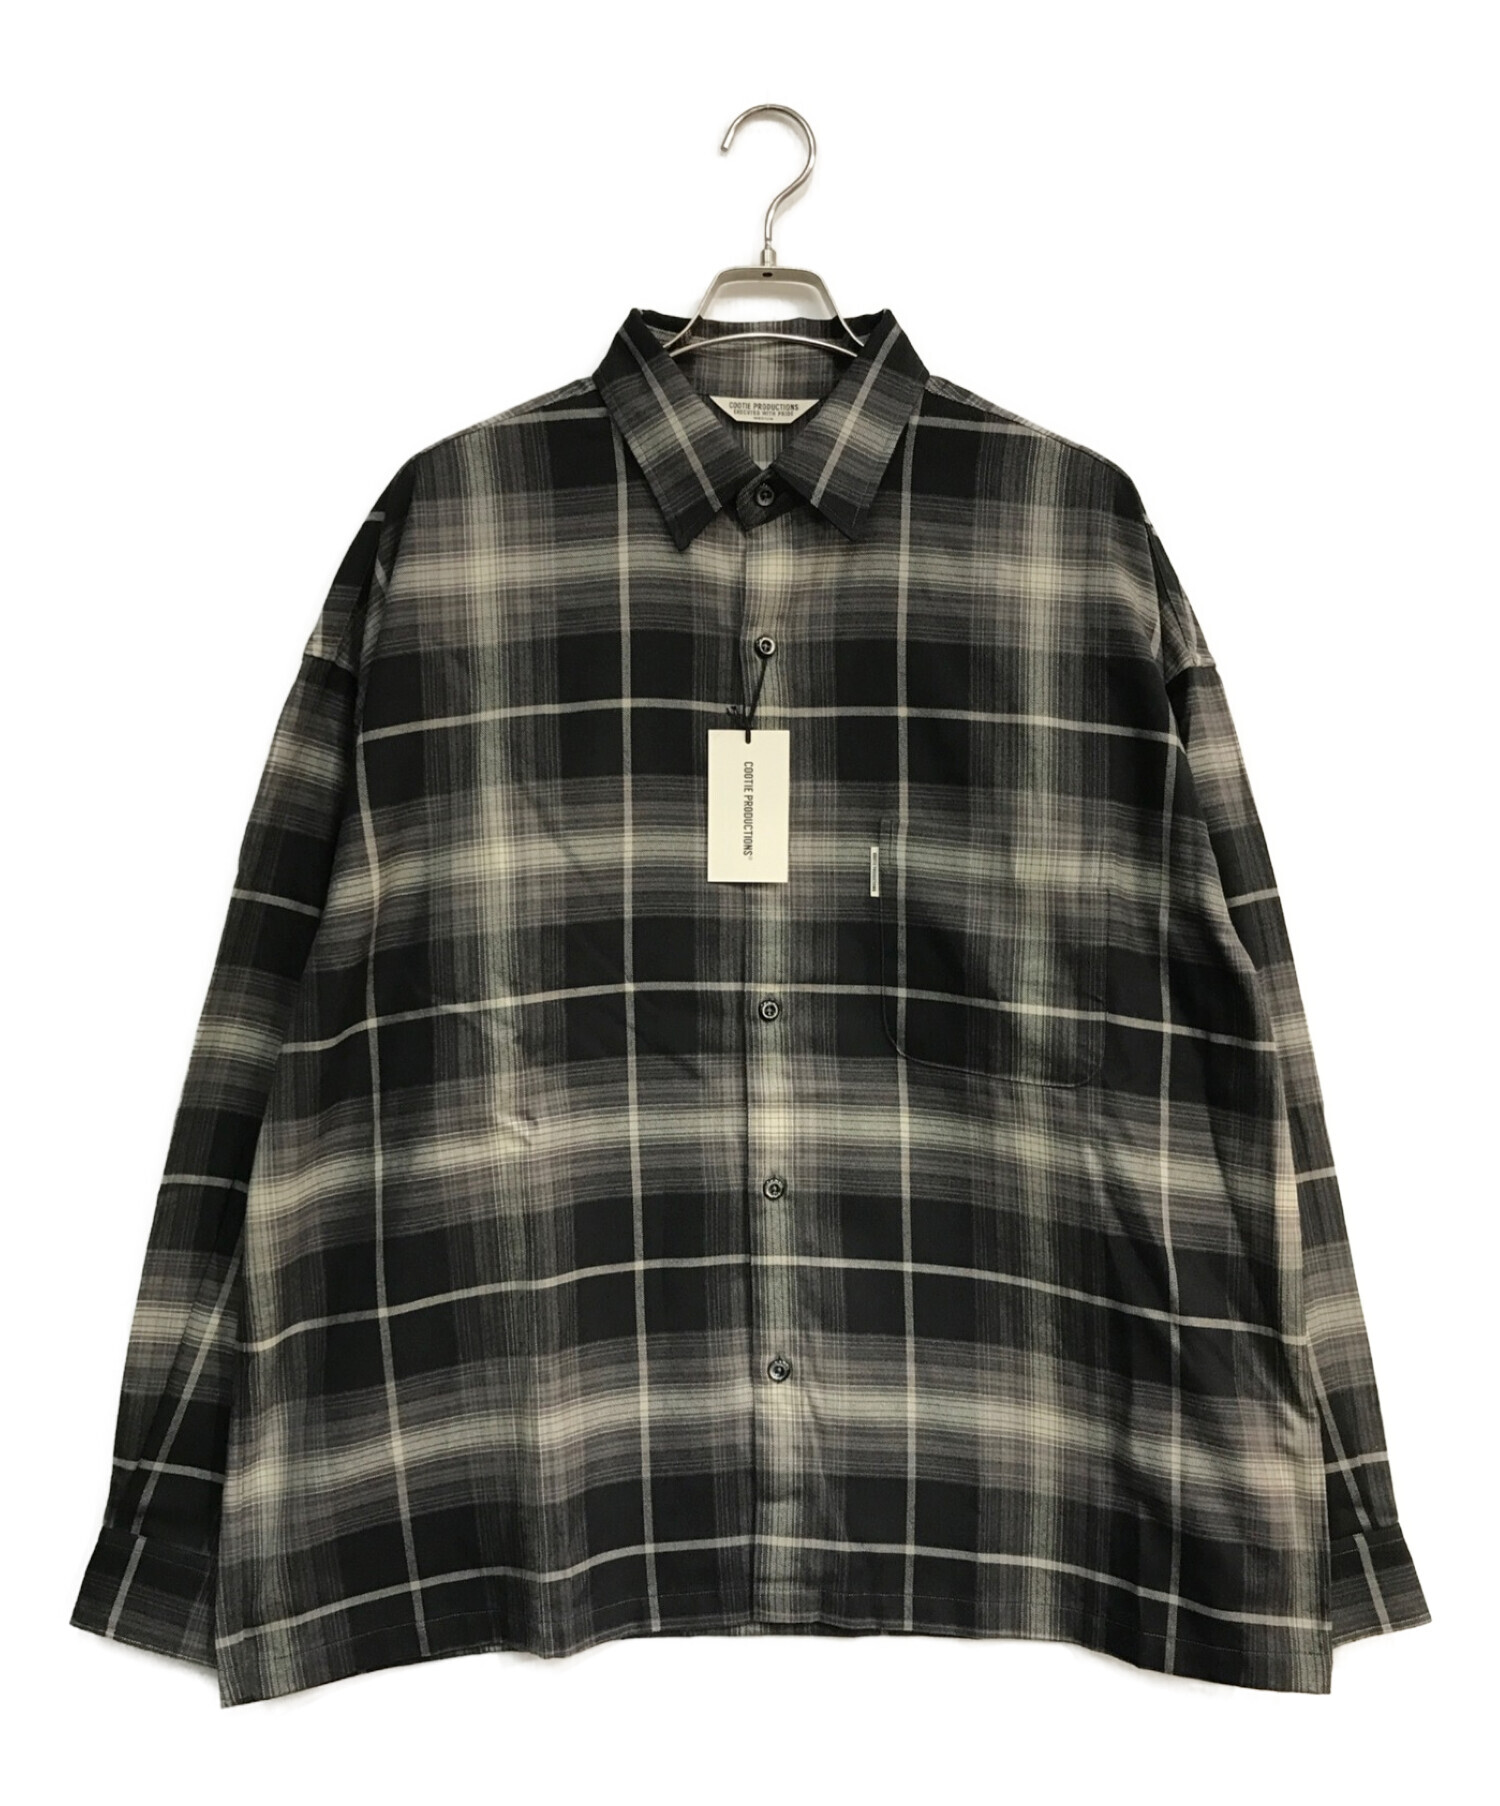 used オンブレチェックシャツ ombre check shirt